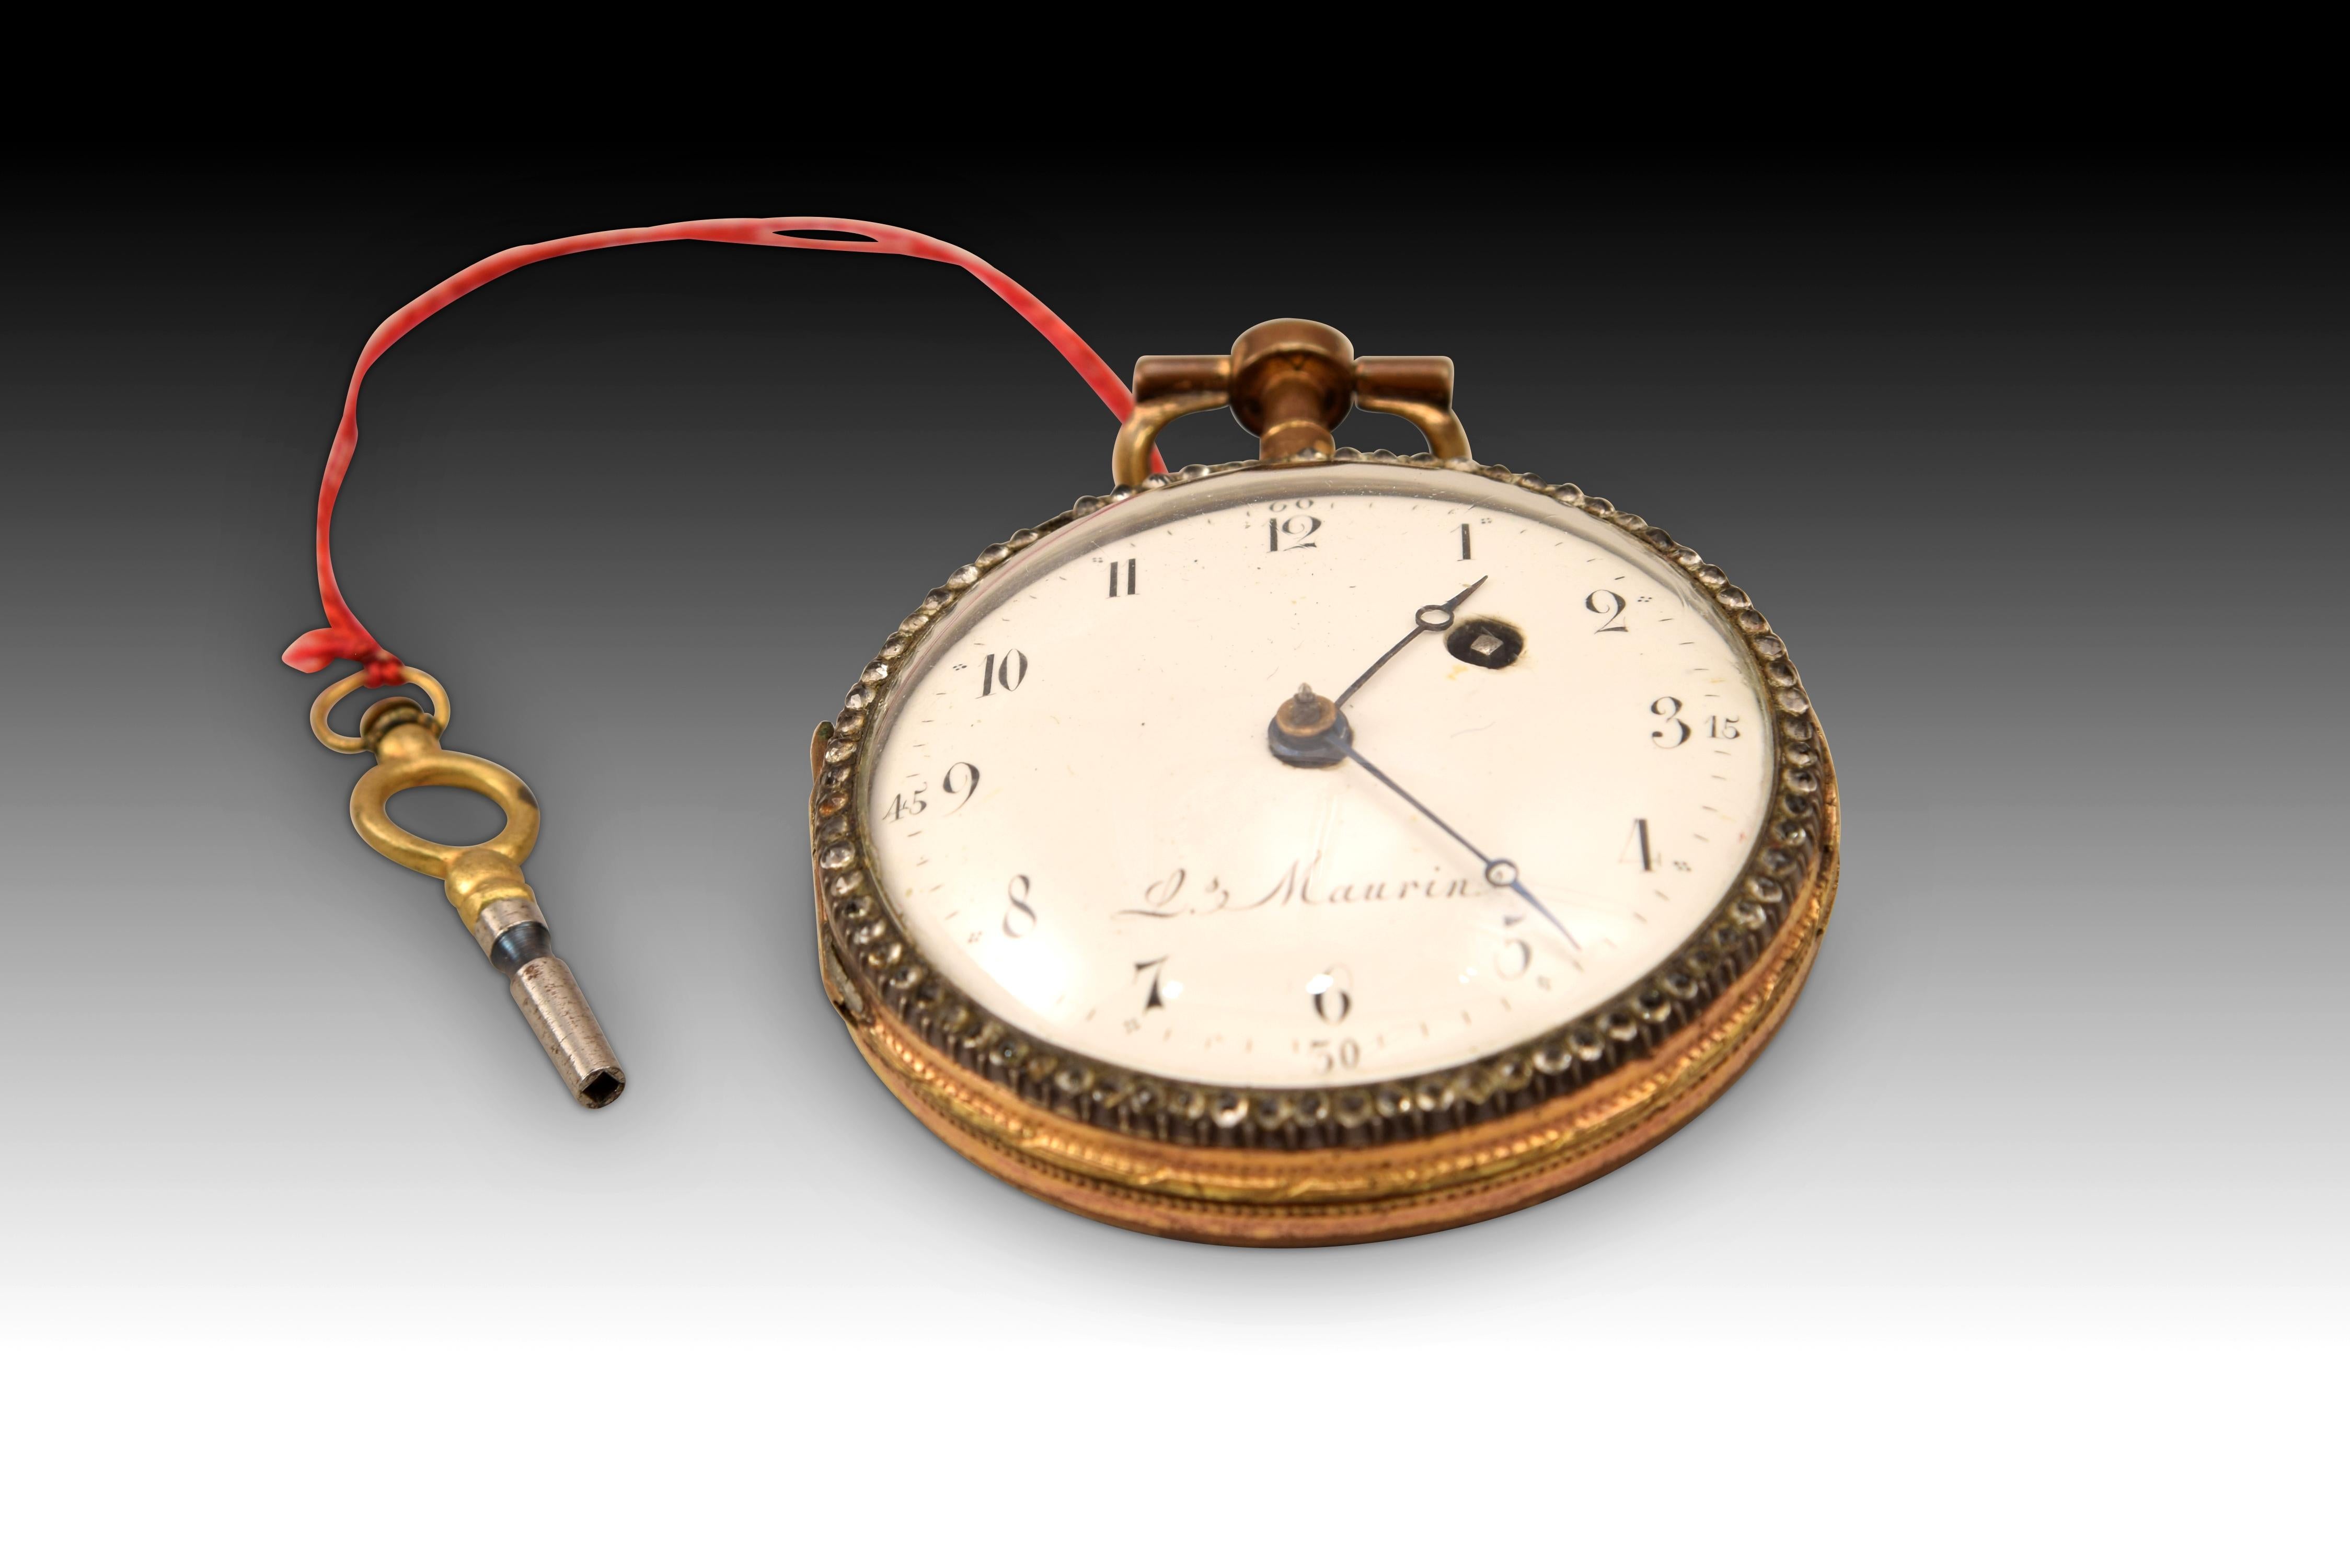 Pocket Watch, Lz Maurin, Gilded Metal, Enamels, Etc, 19th Century For Sale 1